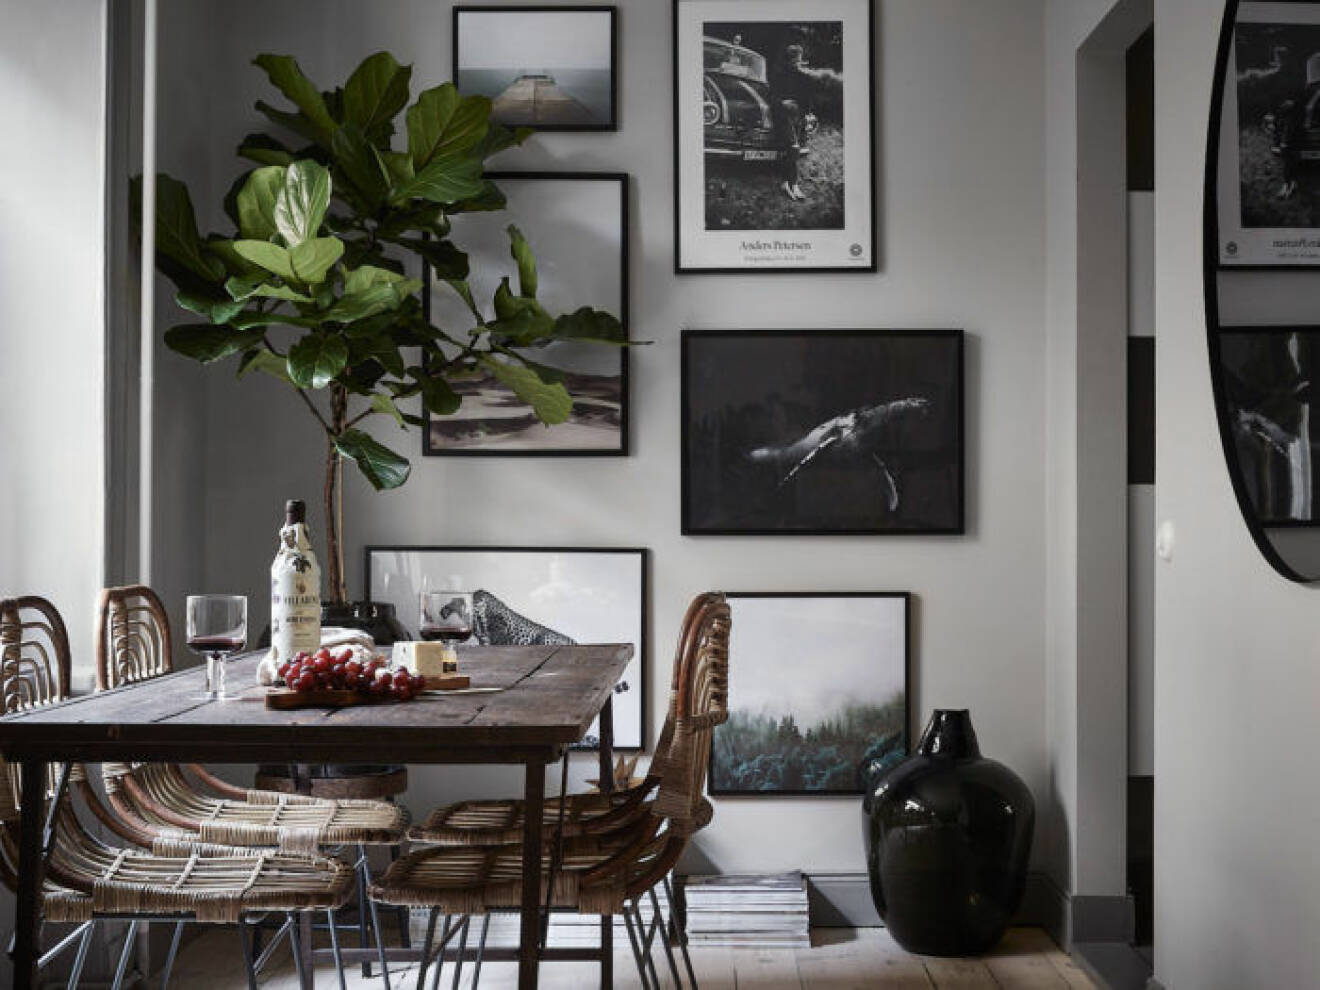 Scandinavian decoration and ideas. Artwall besides the dining table and ficus lyrata.